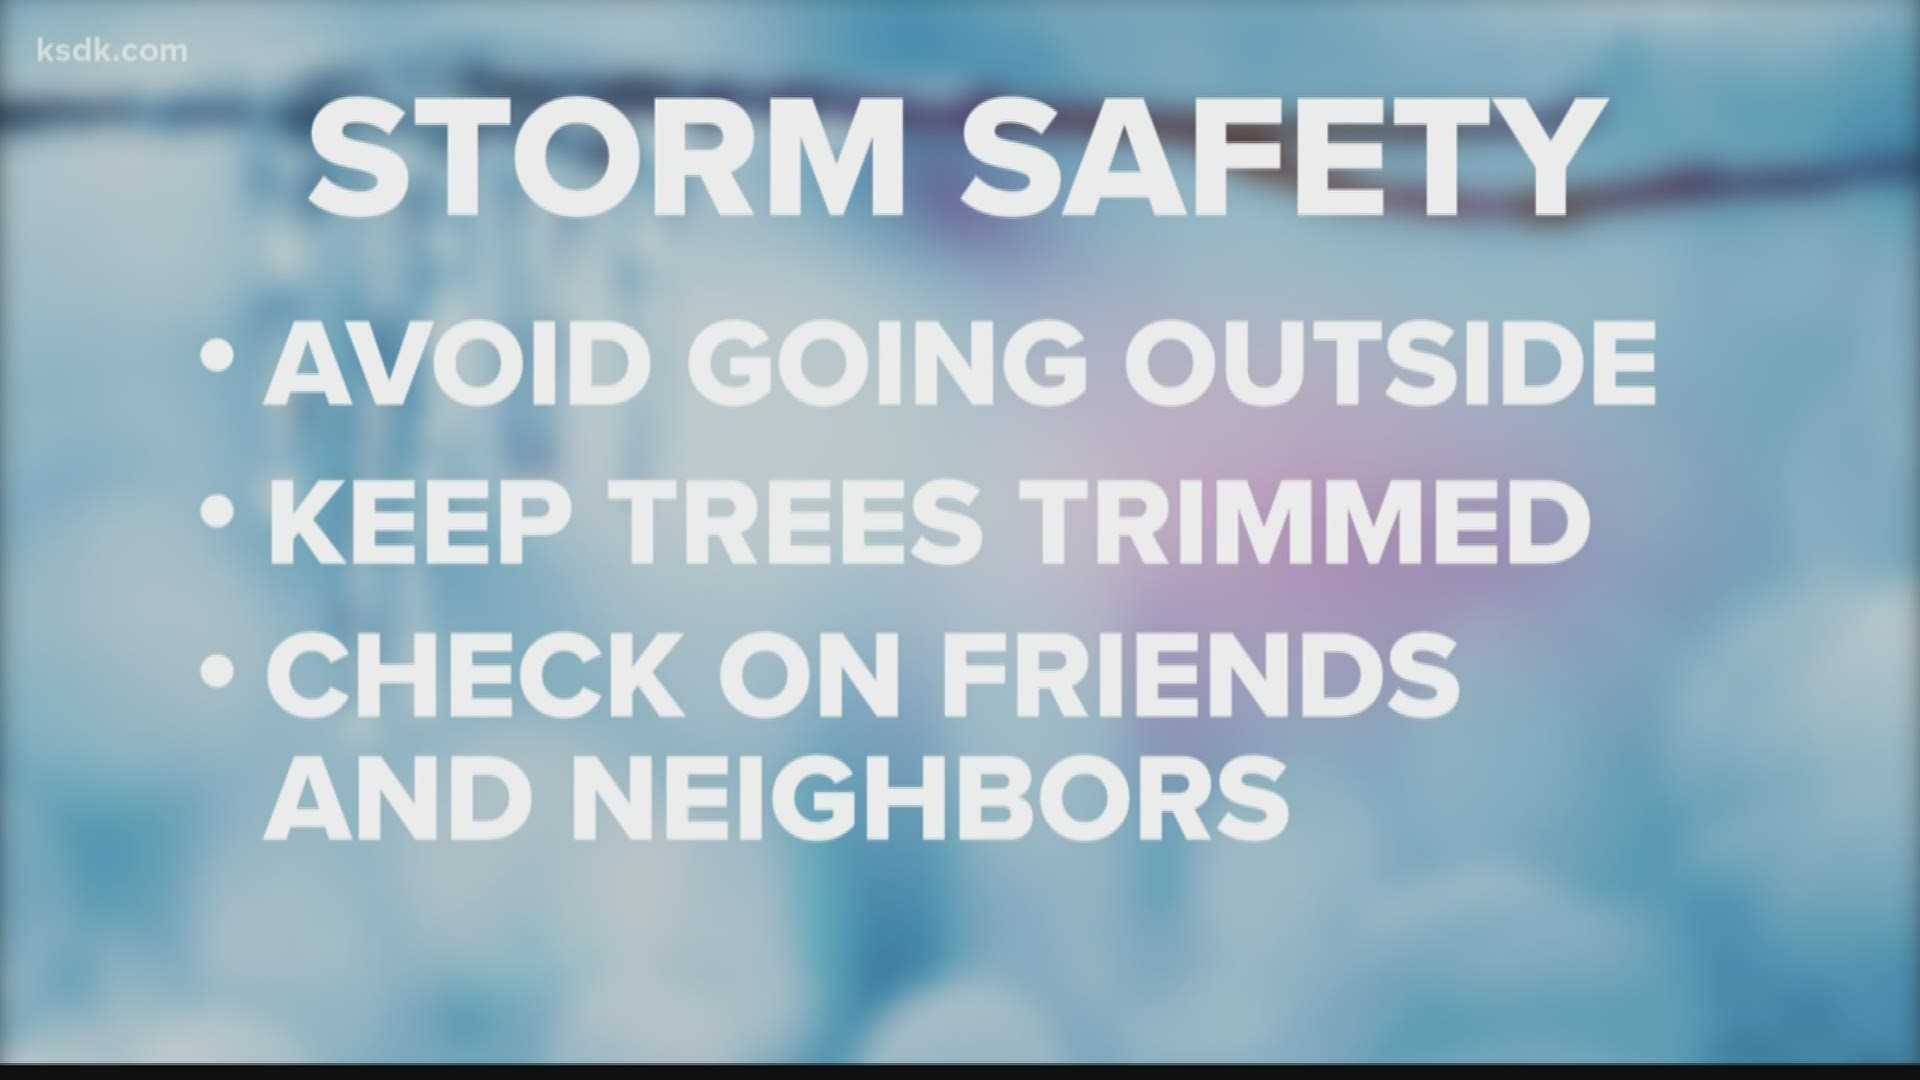 If you will be out in the storm, here are some tips to keep in mind.